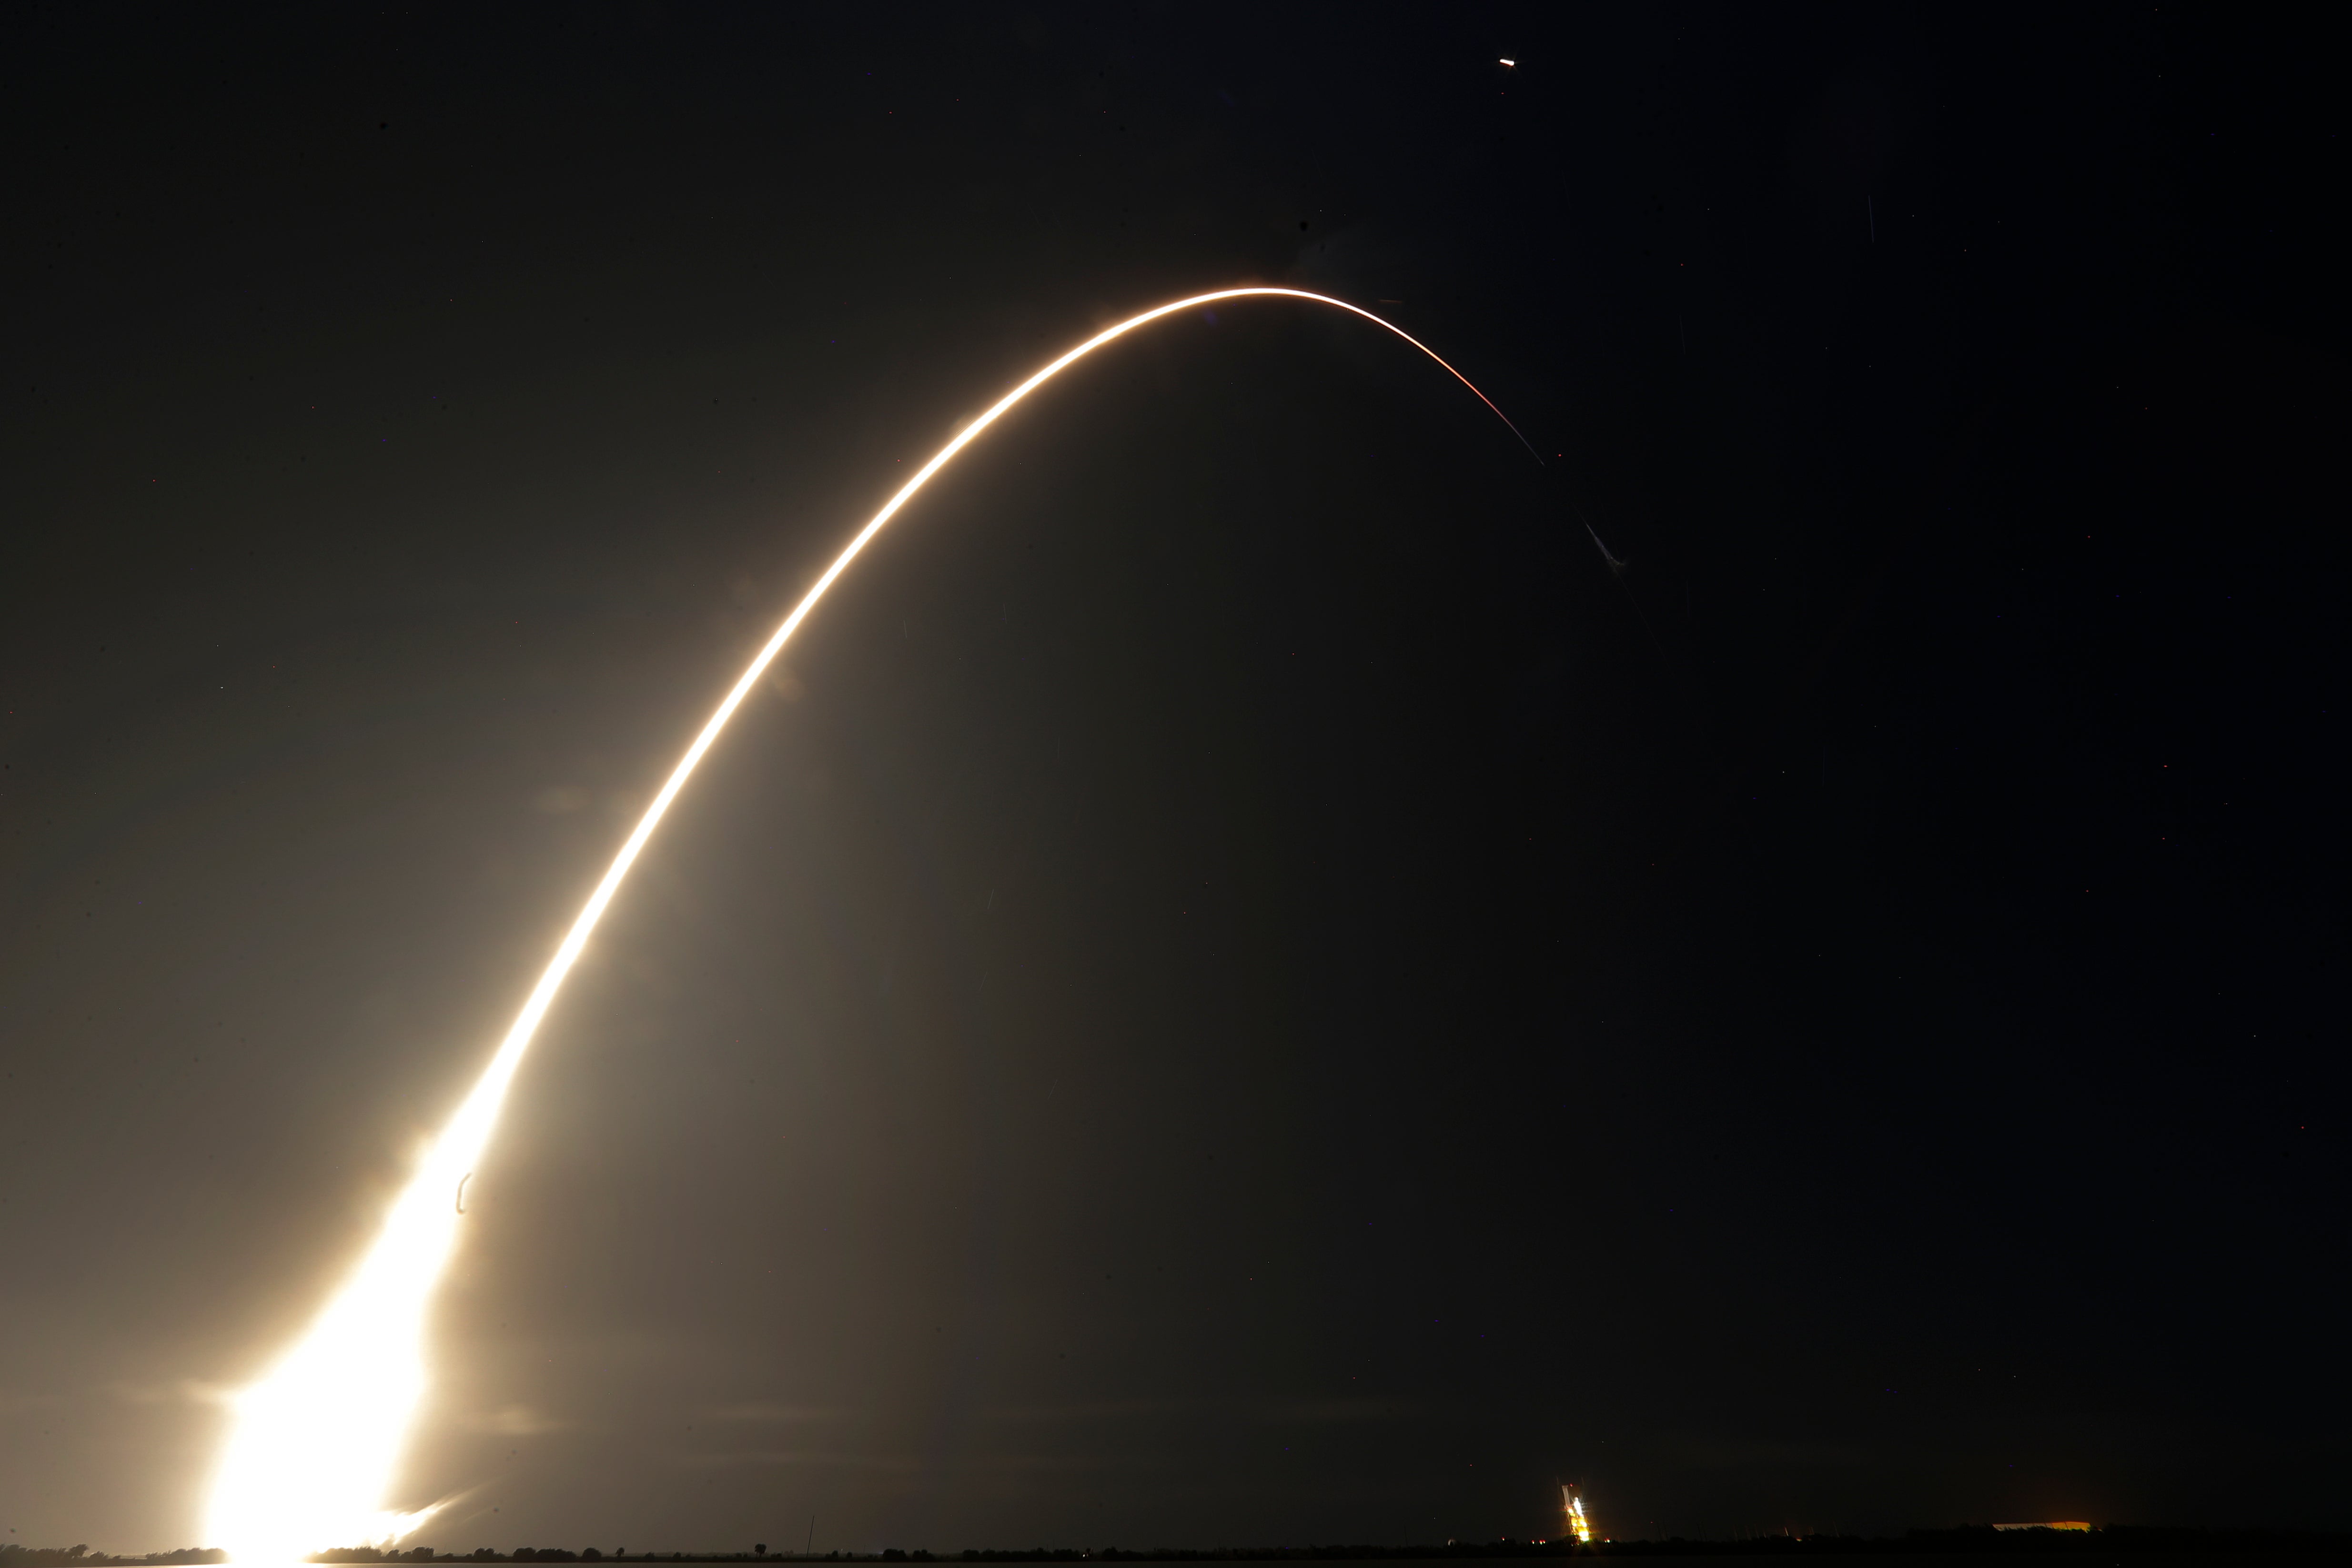 A SpaceX Falcon 9 rocket launches from Cape Canaveral Space Force Station, Florida, in 2022